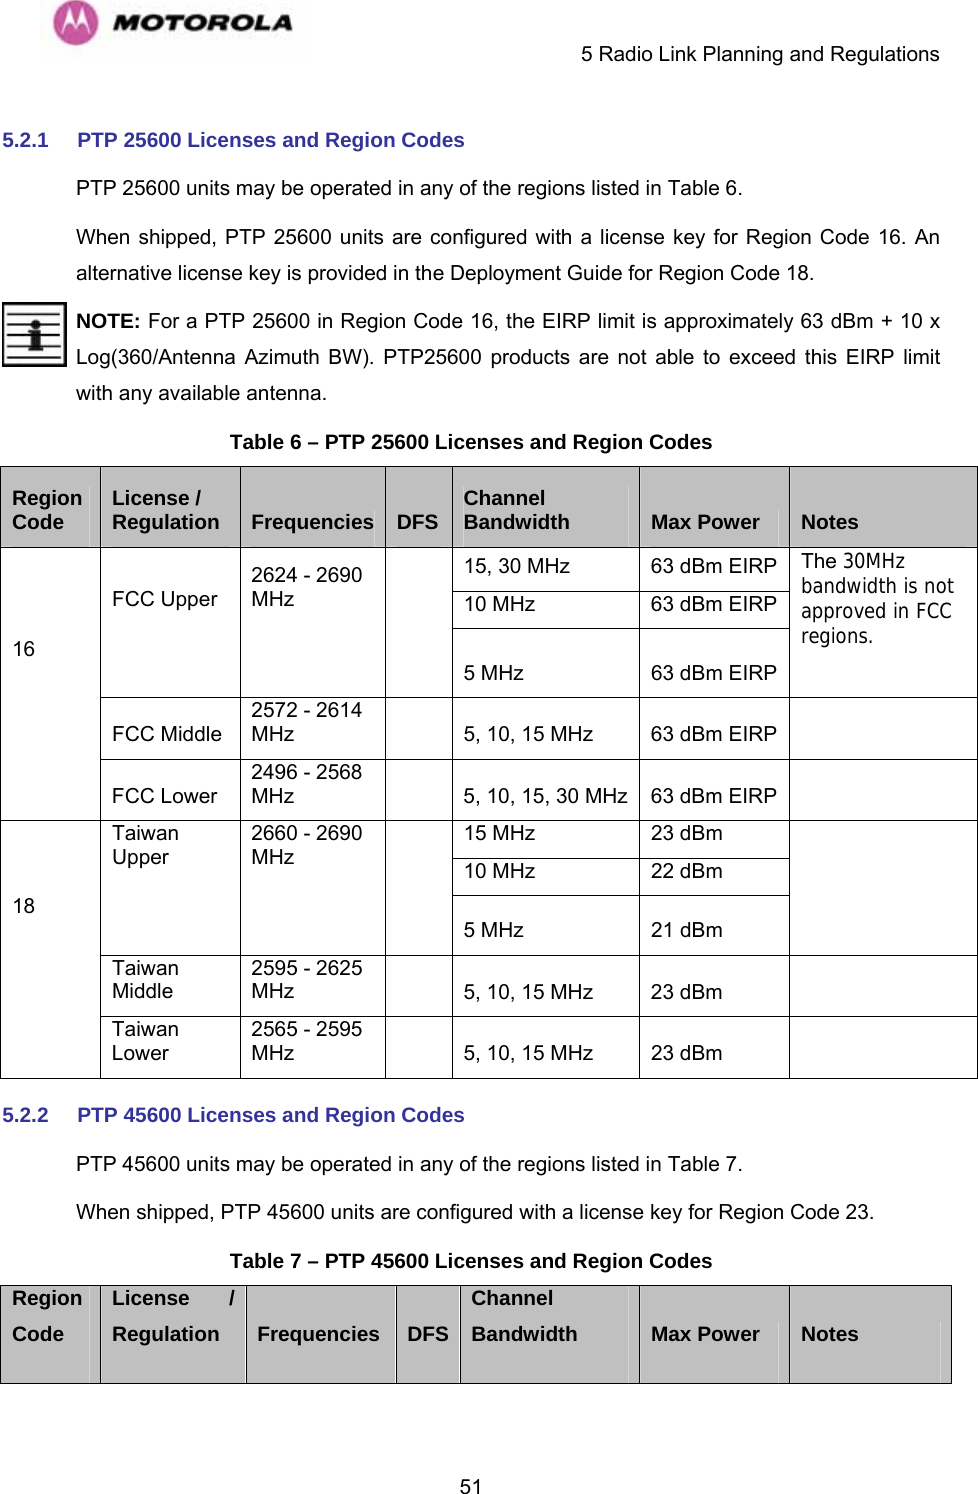     5 Radio Link Planning and Regulations  515.2.1  PTP 25600 Licenses and Region Codes PTP 25600 units may be operated in any of the regions listed in Table 6. When shipped, PTP 25600 units are configured with a license key for Region Code 16. An alternative license key is provided in the Deployment Guide for Region Code 18.  NOTE: For a PTP 25600 in Region Code 16, the EIRP limit is approximately 63 dBm + 10 x Log(360/Antenna Azimuth BW). PTP25600 products are not able to exceed this EIRP limit with any available antenna. Table 6 – PTP 25600 Licenses and Region Codes Region Code  License / Regulation  Frequencies DFS  Channel Bandwidth  Max Power  Notes 15, 30 MHz  63 dBm EIRP 10 MHz  63 dBm EIRP FCC Upper     2624 - 2690 MHz            5 MHz  63 dBm EIRP The 30MHz bandwidth is not approved in FCC regions.    FCC Middle 2572 - 2614 MHz     5, 10, 15 MHz  63 dBm EIRP    16          FCC Lower 2496 - 2568 MHz     5, 10, 15, 30 MHz 63 dBm EIRP    15 MHz  23 dBm 10 MHz  22 dBm Taiwan Upper     2660 - 2690 MHz            5 MHz  21 dBm       Taiwan Middle 2595 - 2625 MHz     5, 10, 15 MHz  23 dBm    18         Taiwan Lower 2565 - 2595 MHz     5, 10, 15 MHz  23 dBm    5.2.2  PTP 45600 Licenses and Region Codes PTP 45600 units may be operated in any of the regions listed in Table 7. When shipped, PTP 45600 units are configured with a license key for Region Code 23. Table 7 – PTP 45600 Licenses and Region Codes Region Code License / Regulation  Frequencies  DFSChannel Bandwidth  Max Power  Notes 